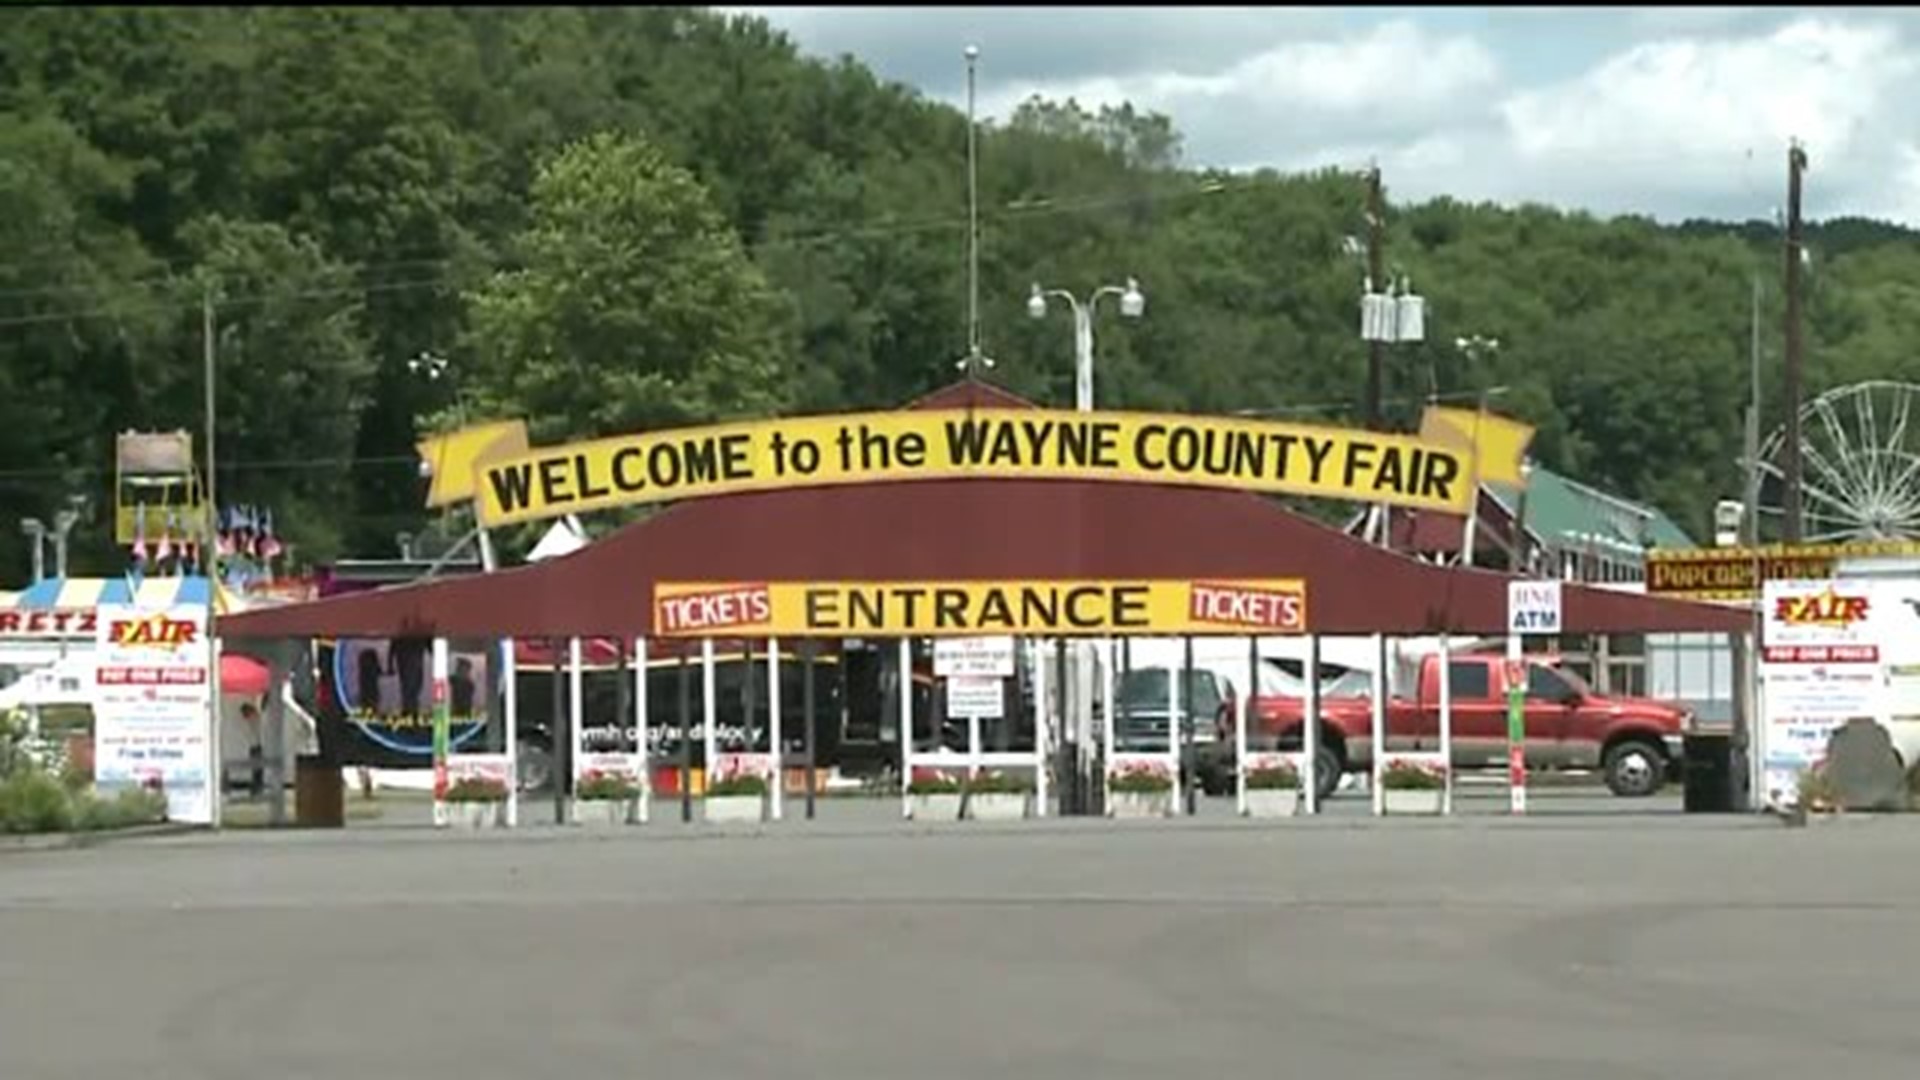 Wayne County Fair Nearly Ready for Opening Day